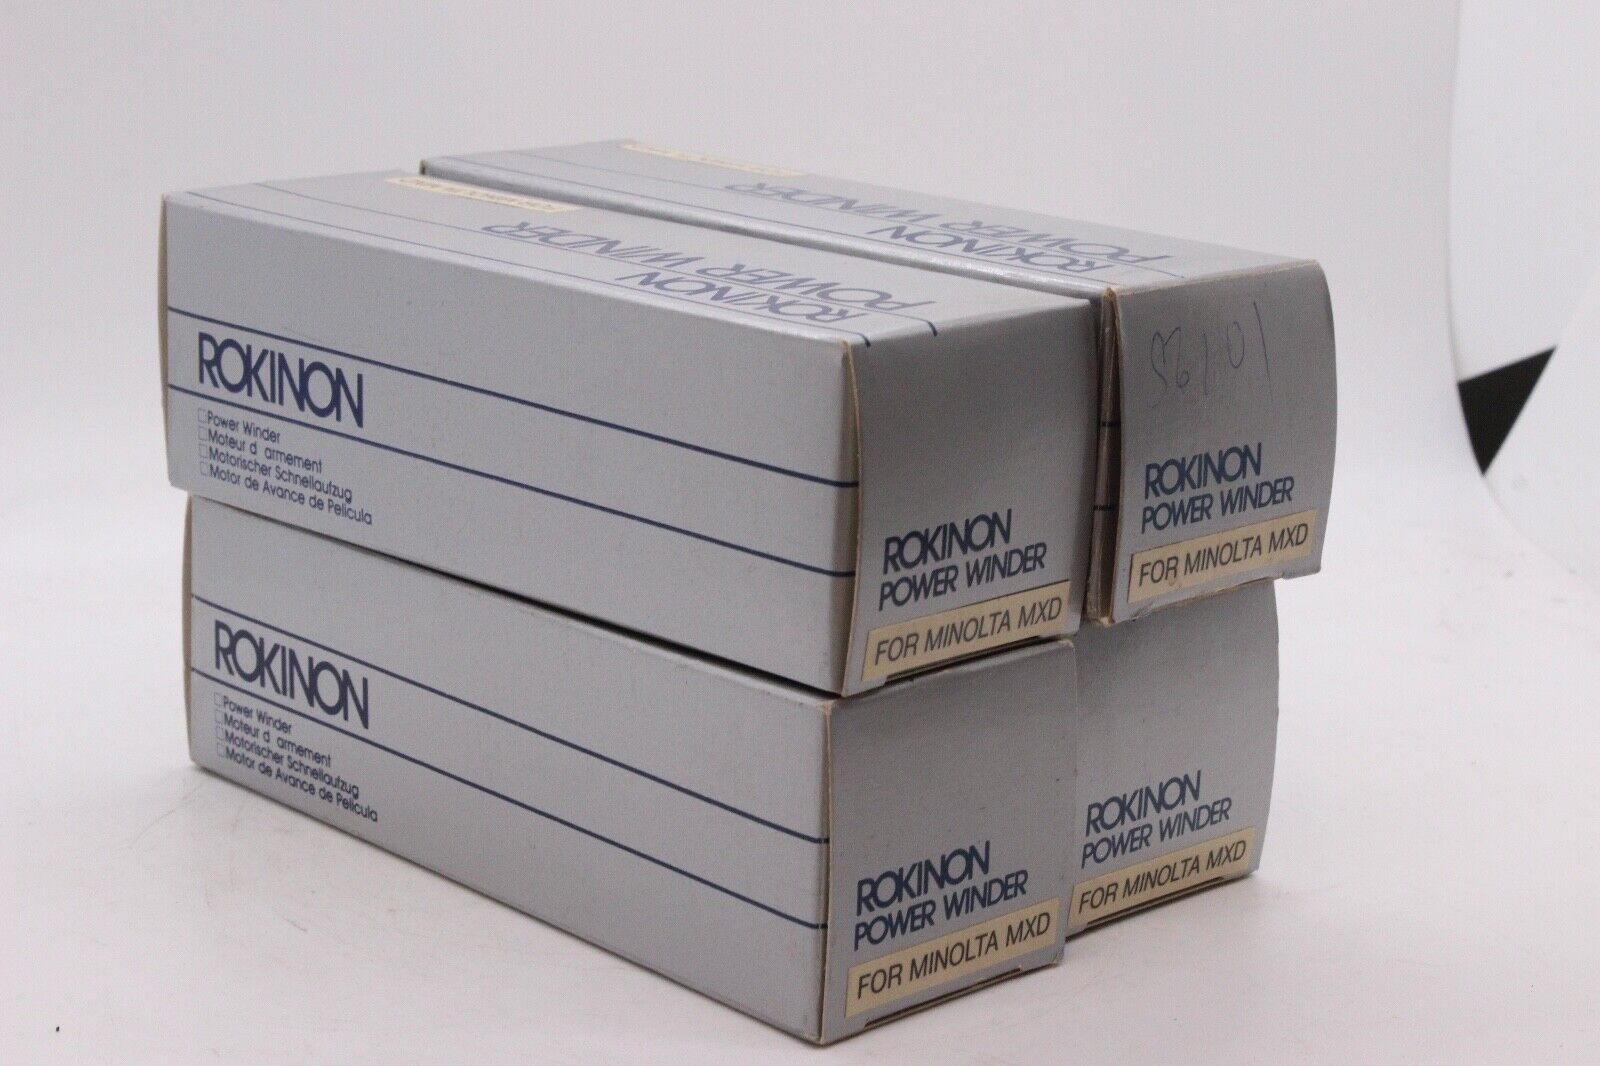 NEW IN BOX ROKINON ELECTRIC POWER WINDER - FOR MINOLTA MXD ROKINON ROKINON ELECTRIC POWER WINDER - фотография #2